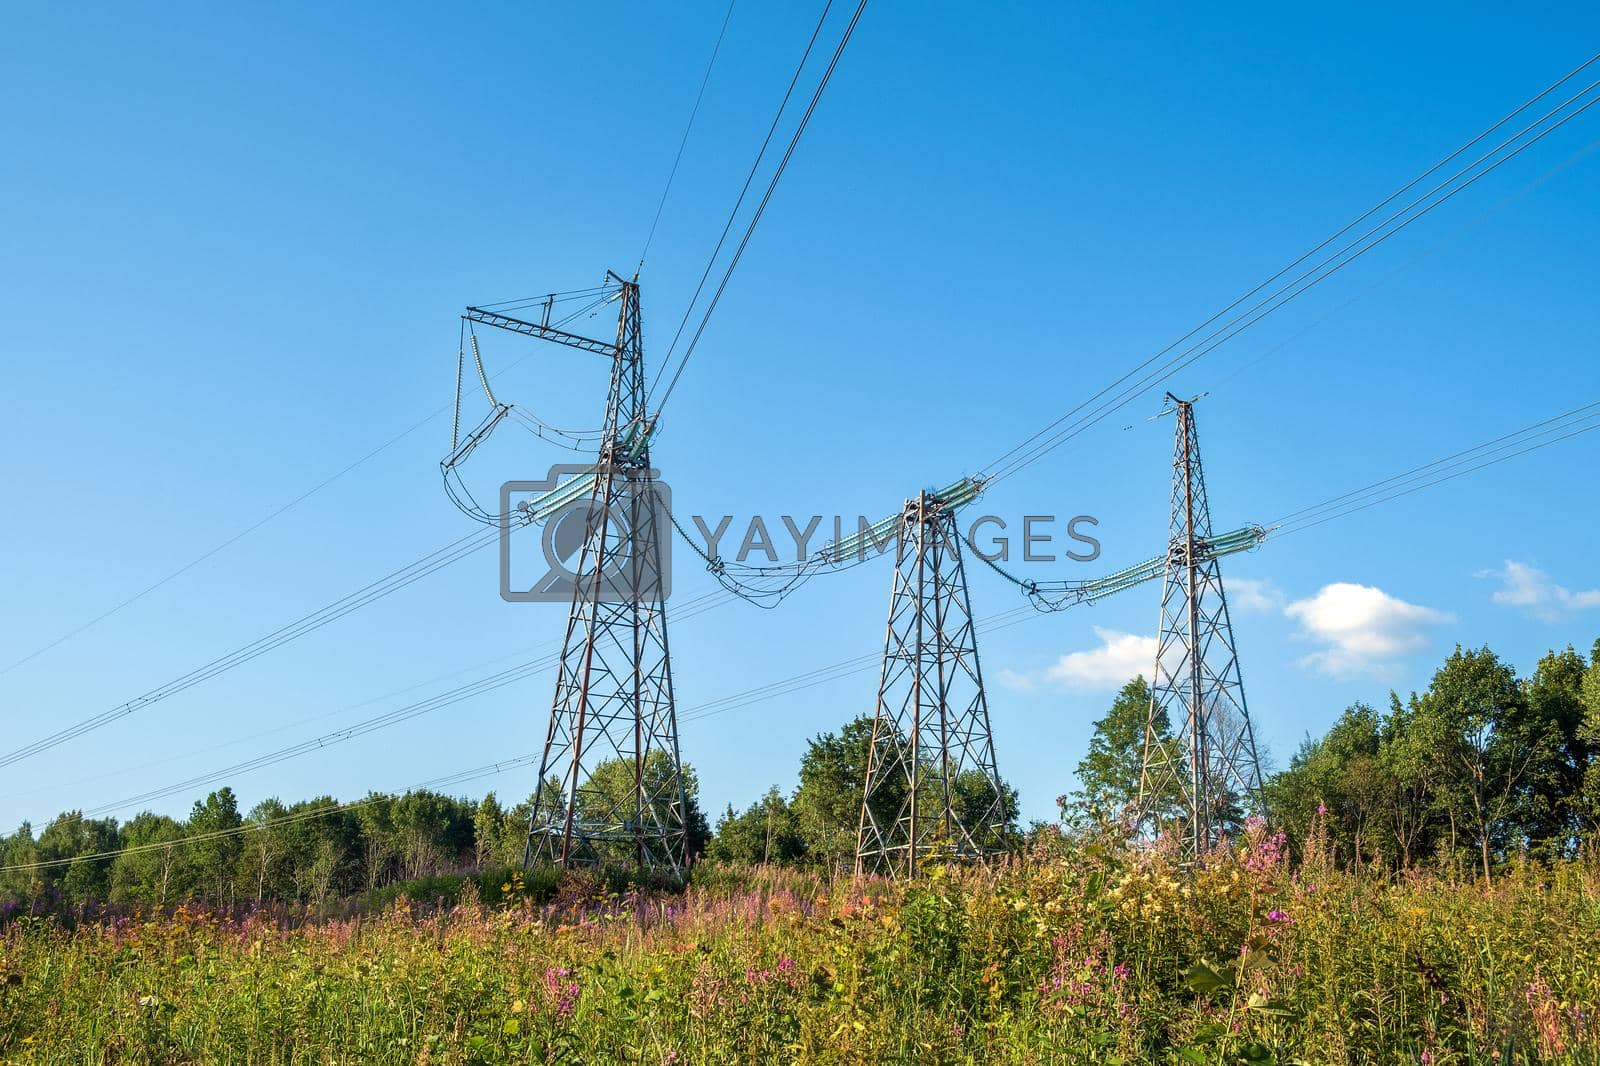 Royalty free image of Fragment of power line as component of large electrical networks by OlgaGubskaya